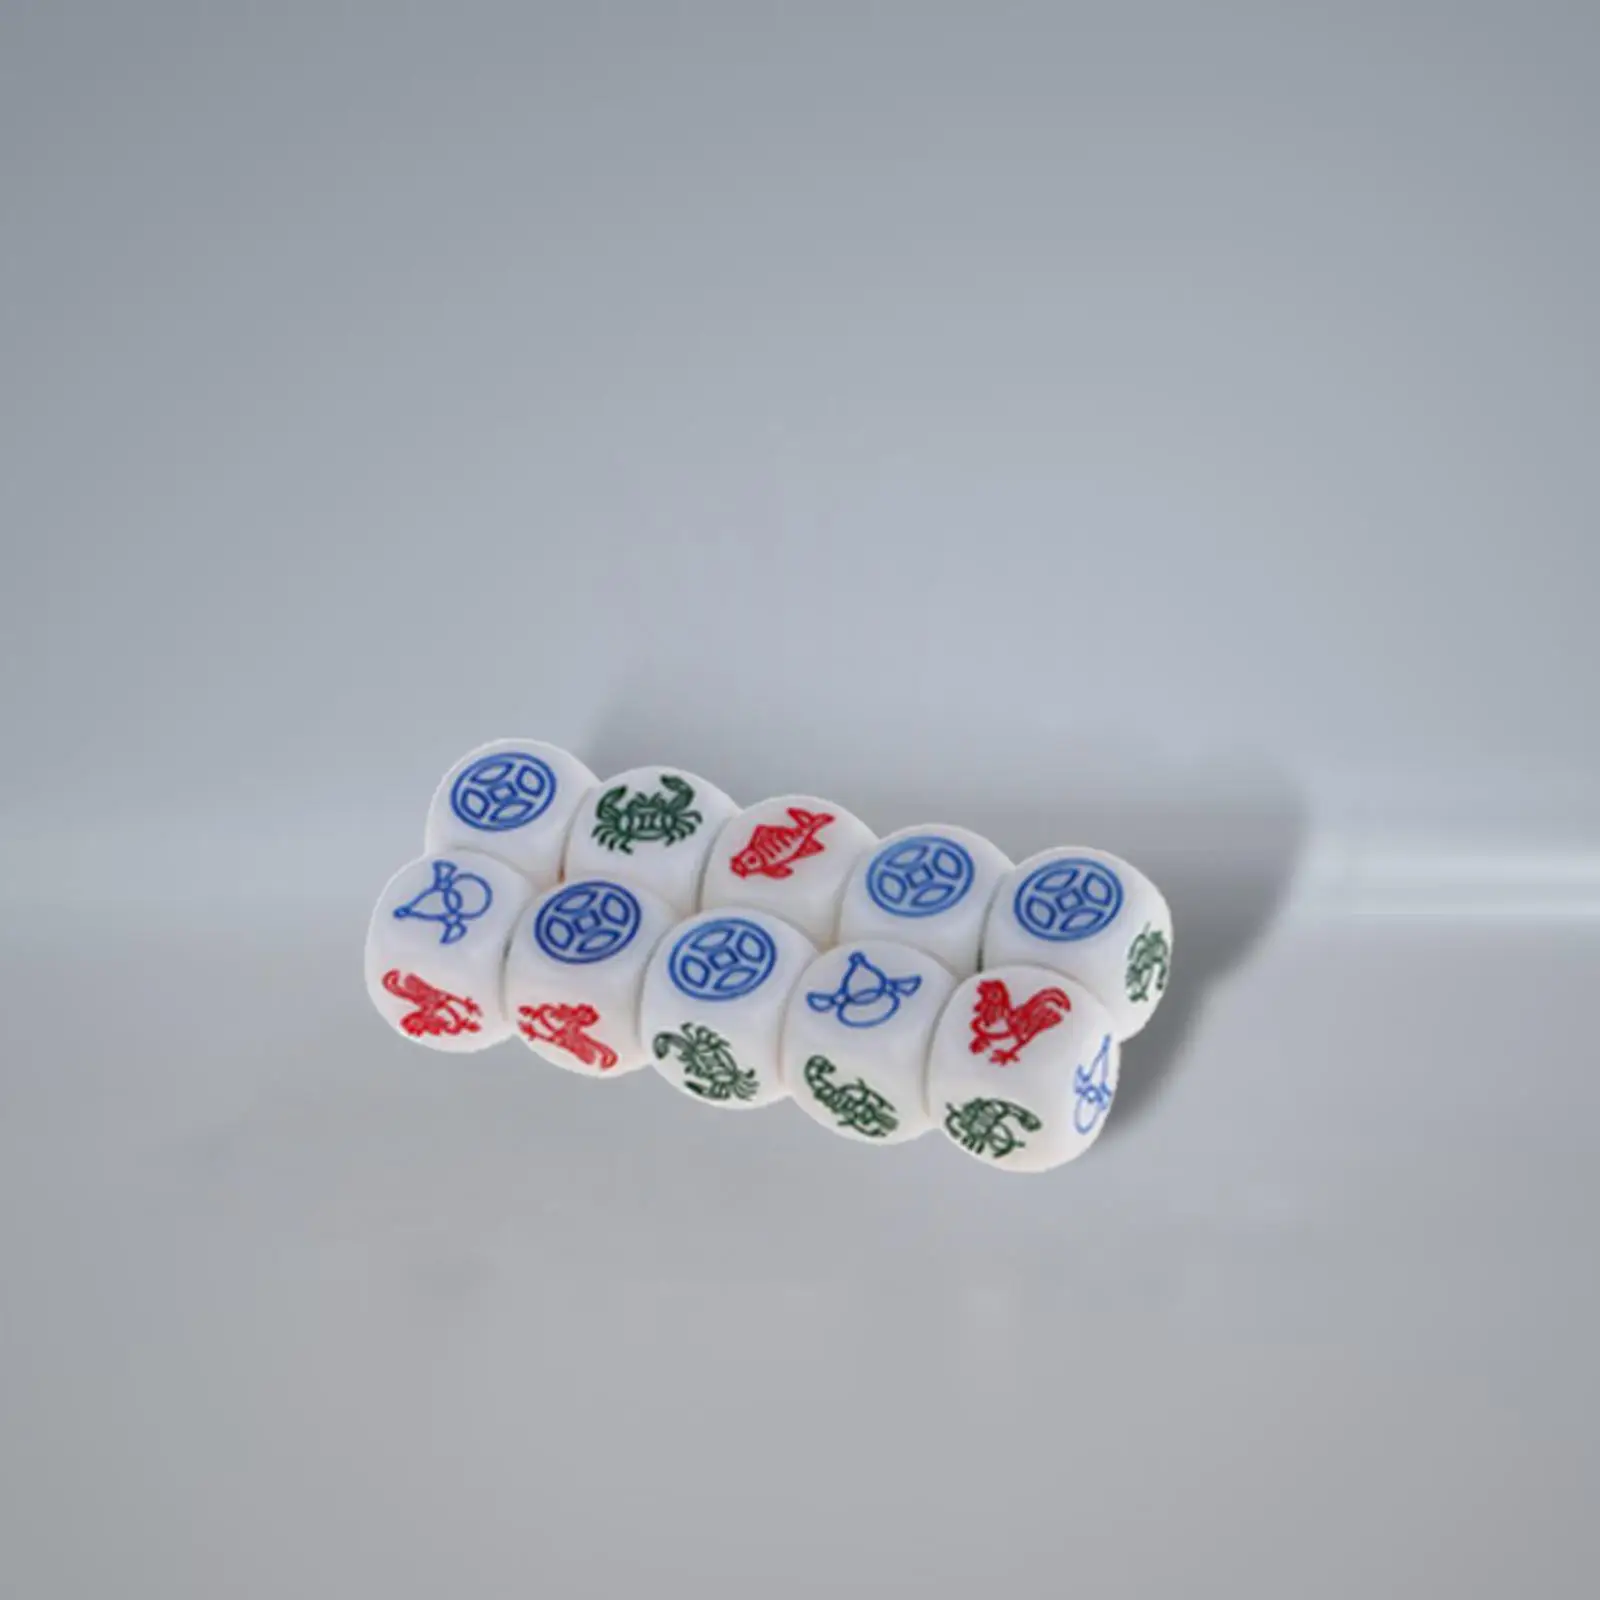 Funny Acrylic dices, Party Game dices Game, Family Table Game for Wedding, Party, Role Playing Game, Family Gathering,